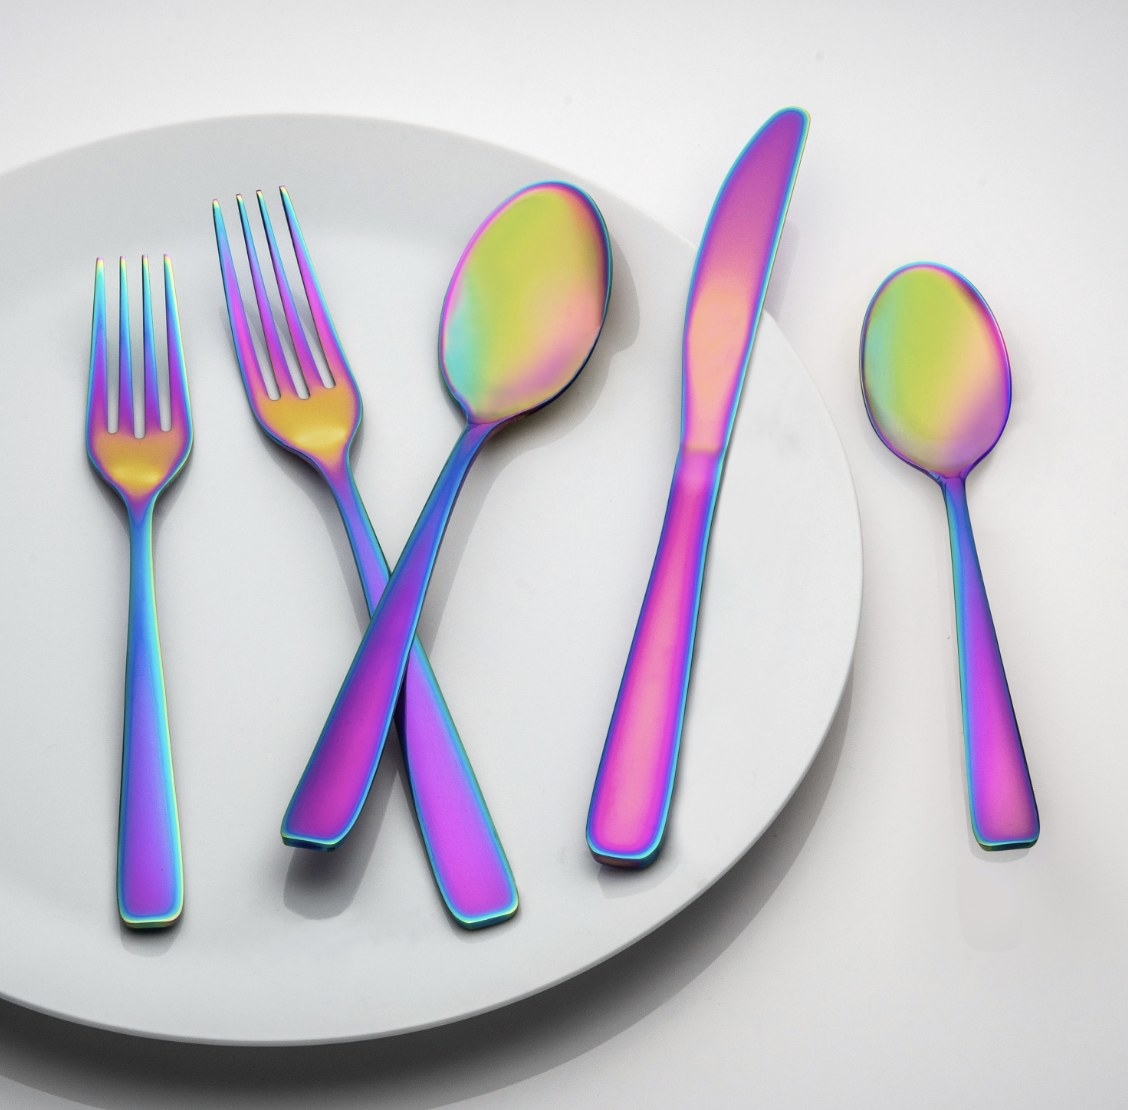 Five pieces of bright blue, purple and gold-toned silverware are laid across a plate and white surface